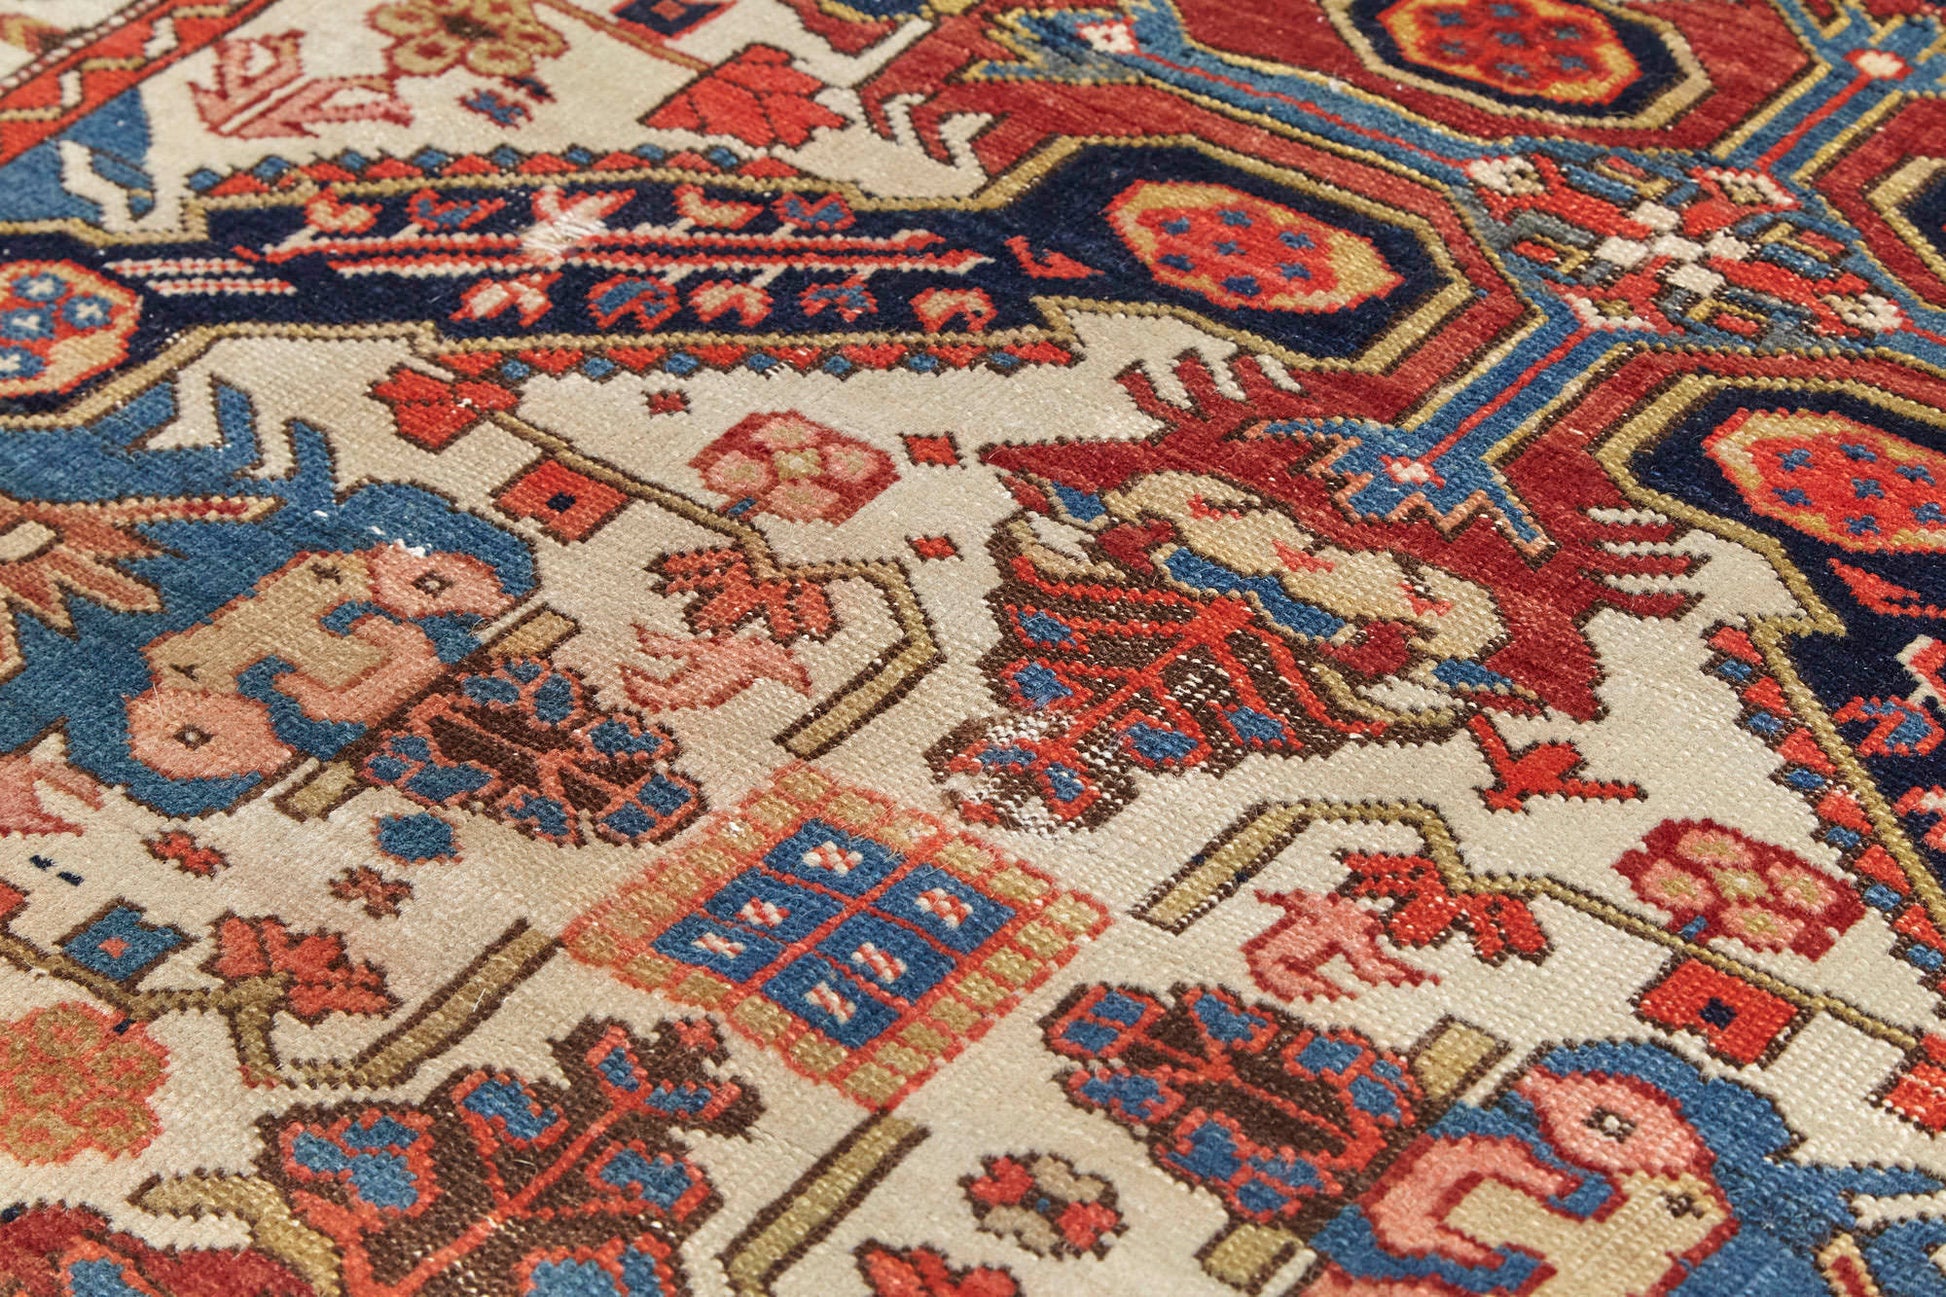 Detail of weave on intricately woven Zeychour Persian rug. Vibrant red and deep blue medallions with floral motifs throughout and border with red flowers and blue and white wave pattern. Available from King Kennedy Rugs Los Angeles